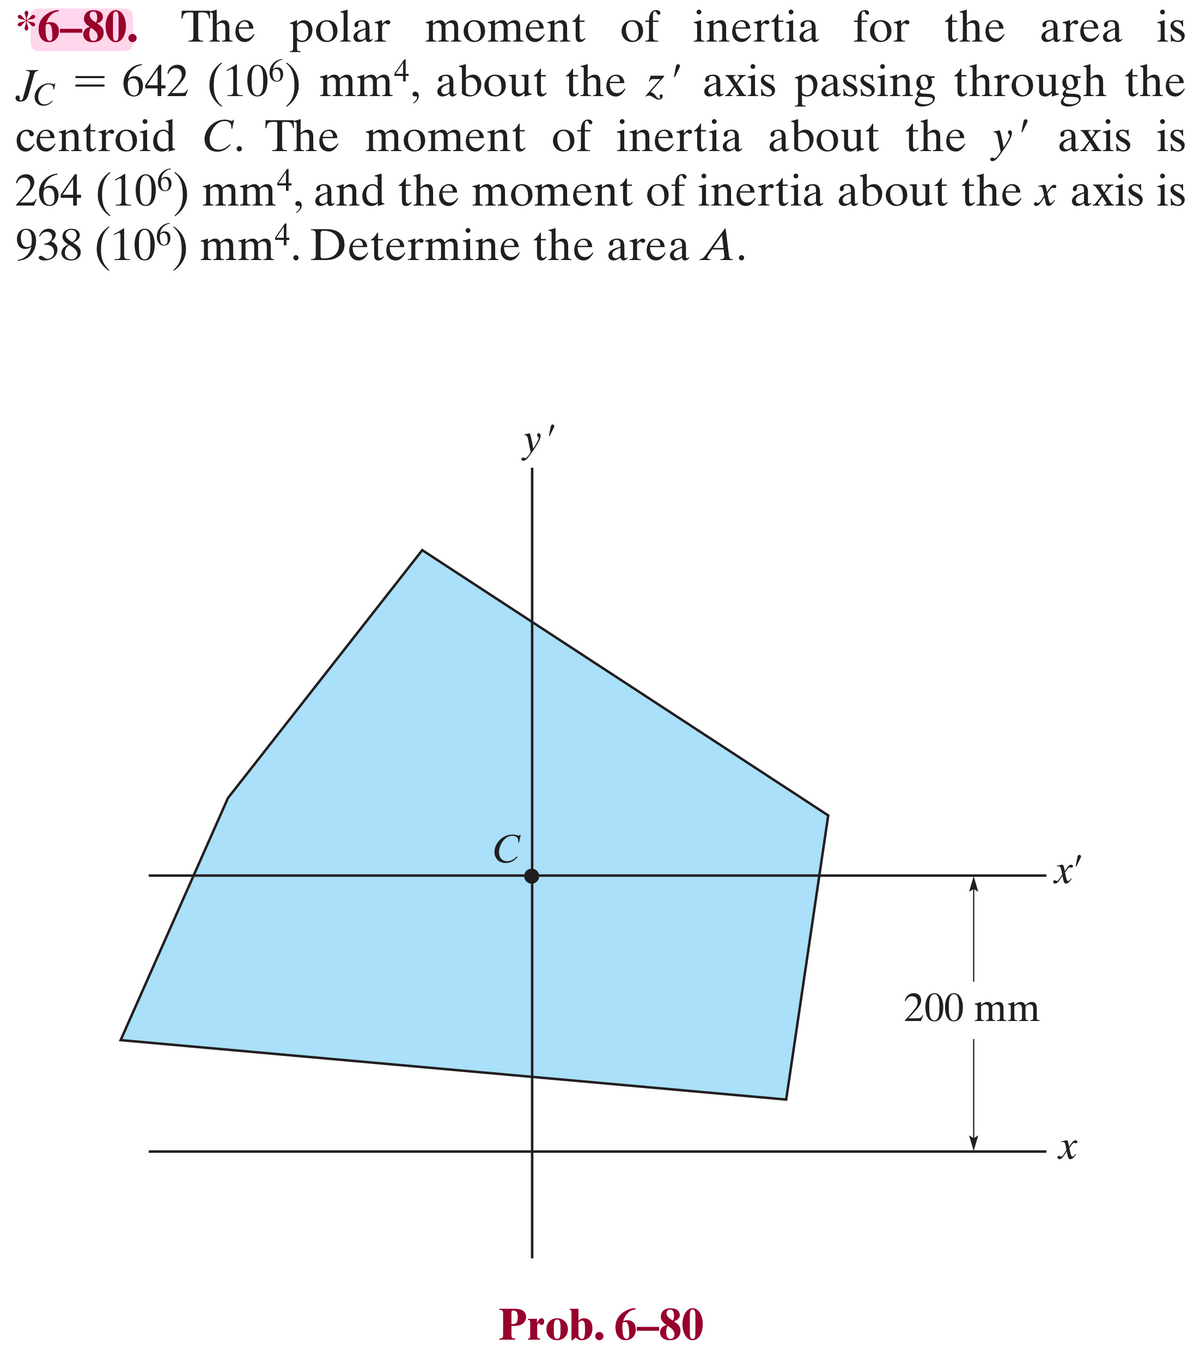 *6-80. The polar moment of inertia for the area is
Jc = 642 (106) mm4, about the z' axis passing through the
centroid C. The moment of inertia about the y' axis is
264 (106) mmª, and the moment of inertia about the x axis is
938 (106) mm4. Determine the area A.
y'
C
Prob. 6-80
200 mm
x'
X